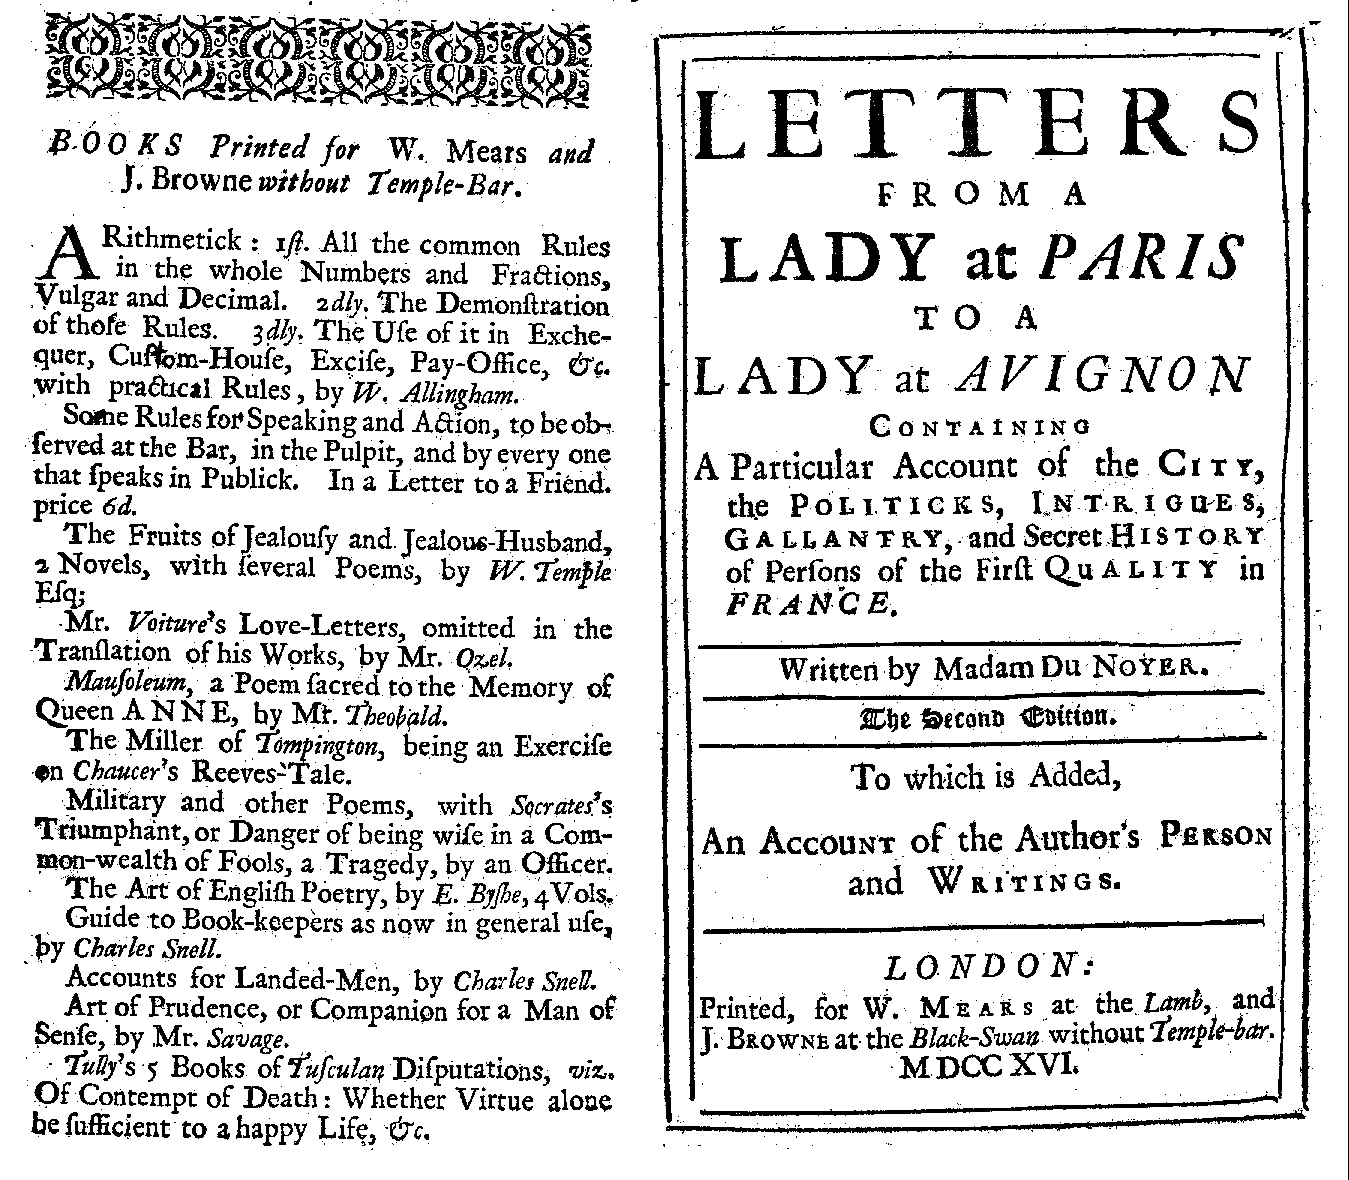 Anne Marguerite Petit DuNoyer, Letters from a Lady at Paris to a Lady at Avignon [...] The Second Edition (London: W. Mears/ J. Browne, 1716).